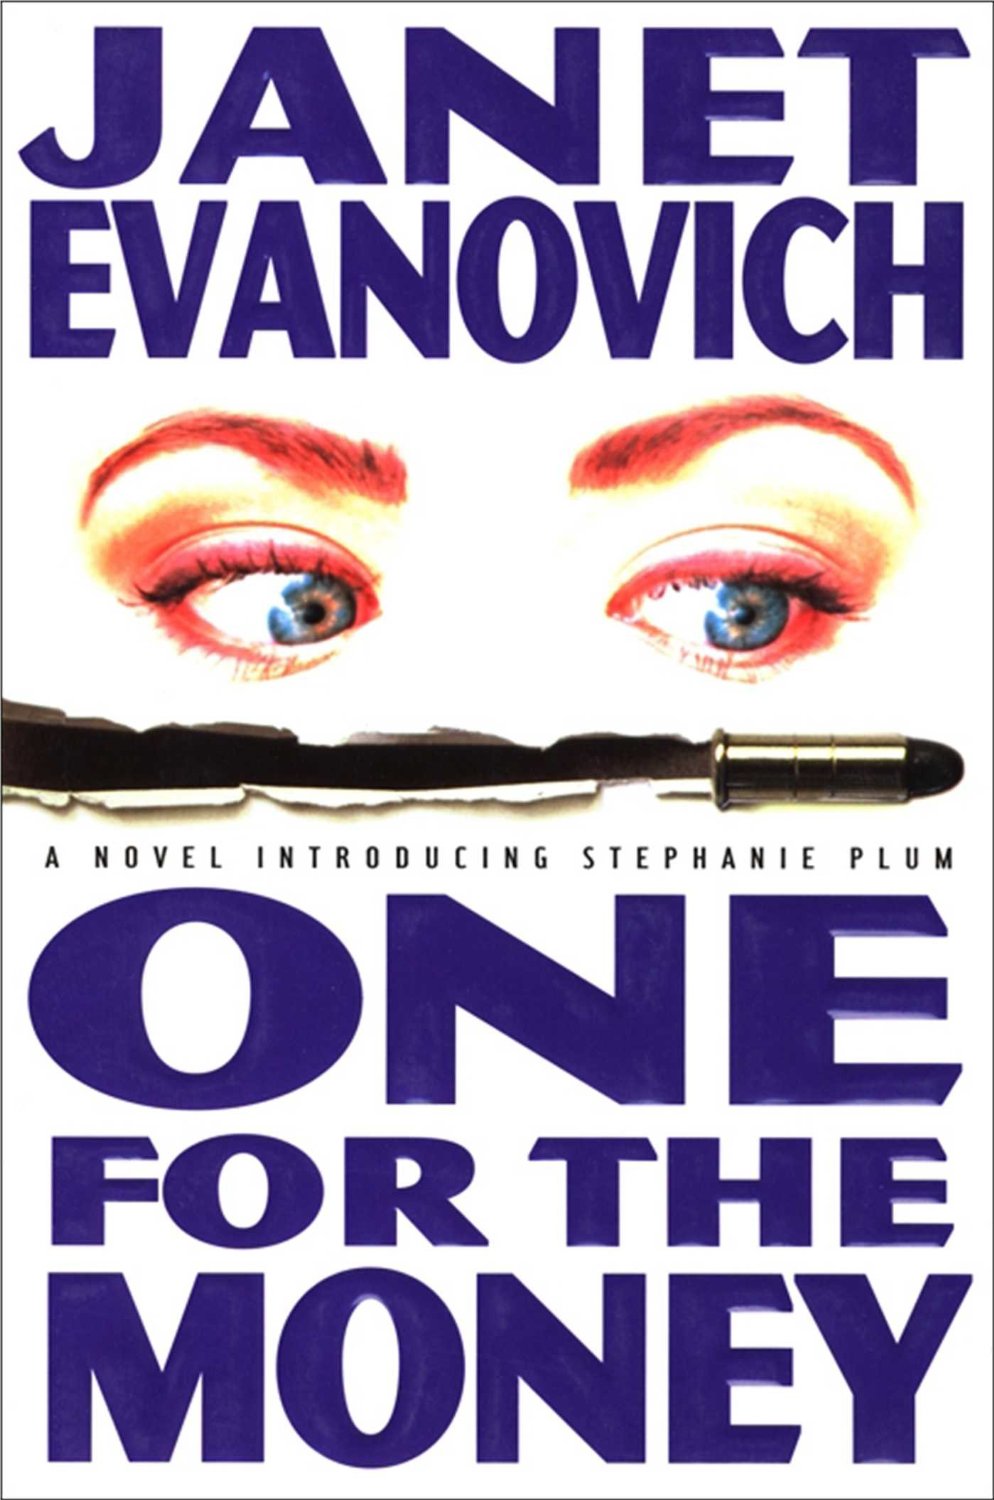 janet evanovich one for the money review